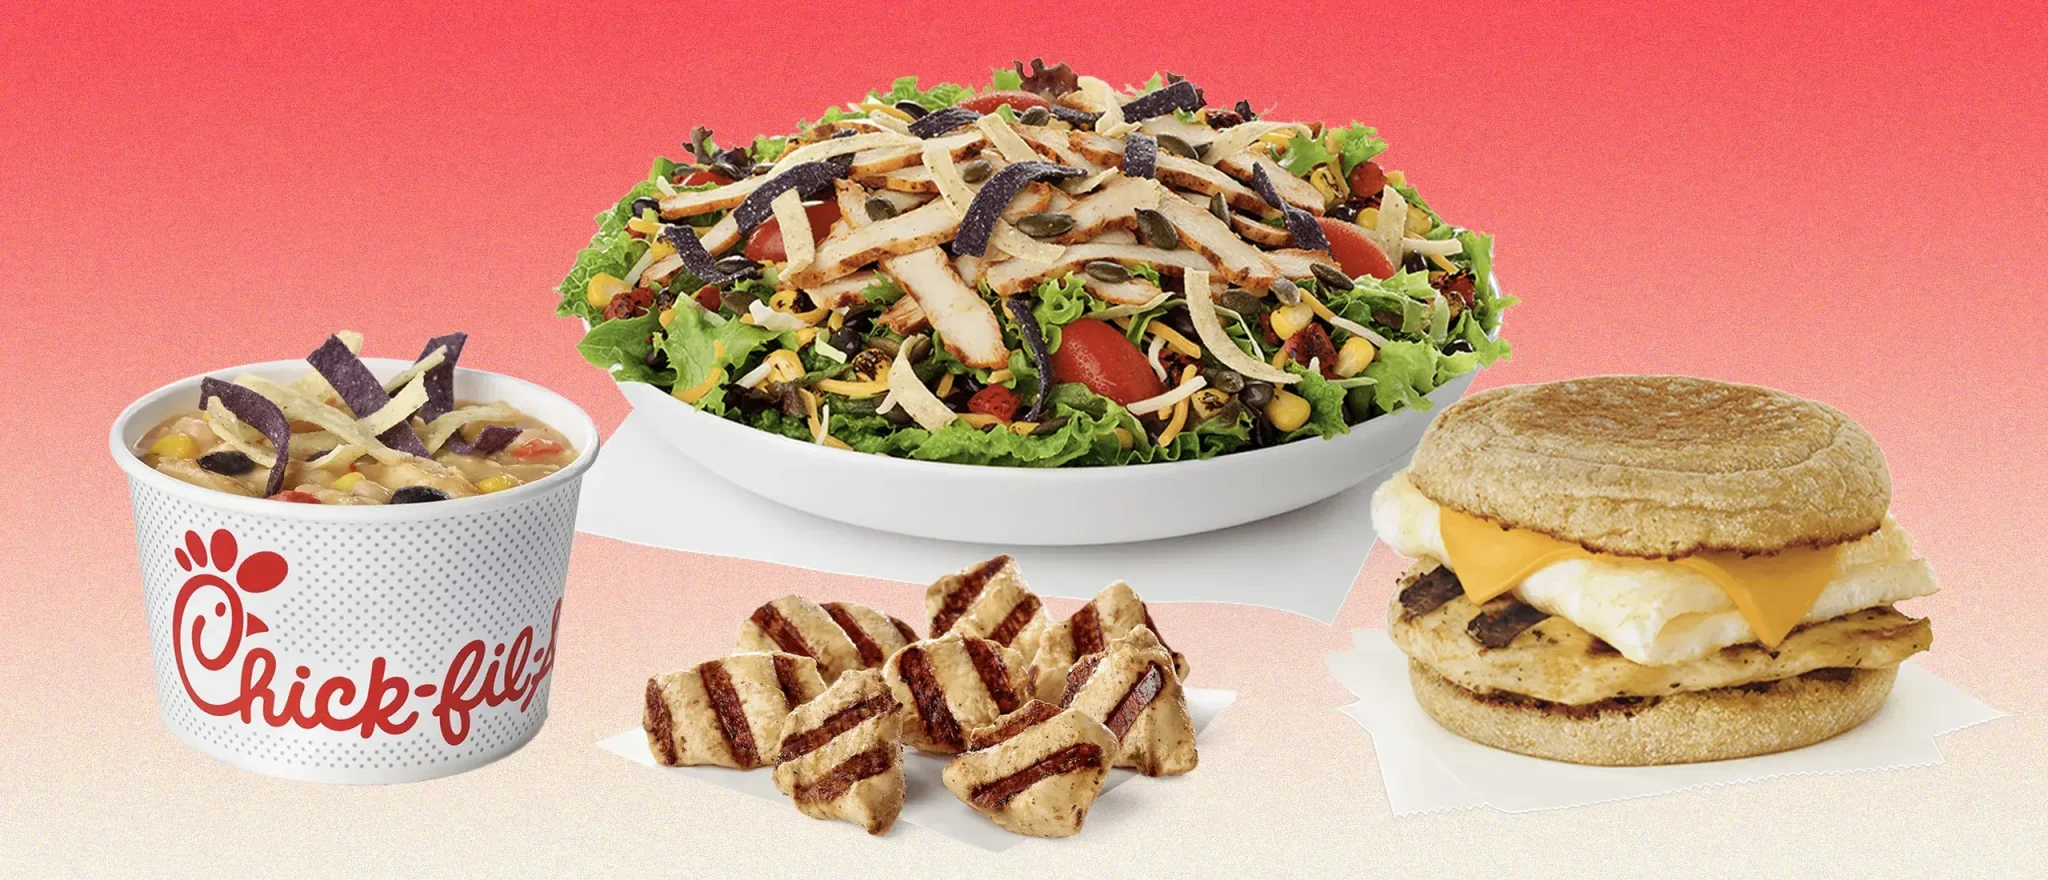 6 Healthy Chick-fil-A Options, And 1 to Skip